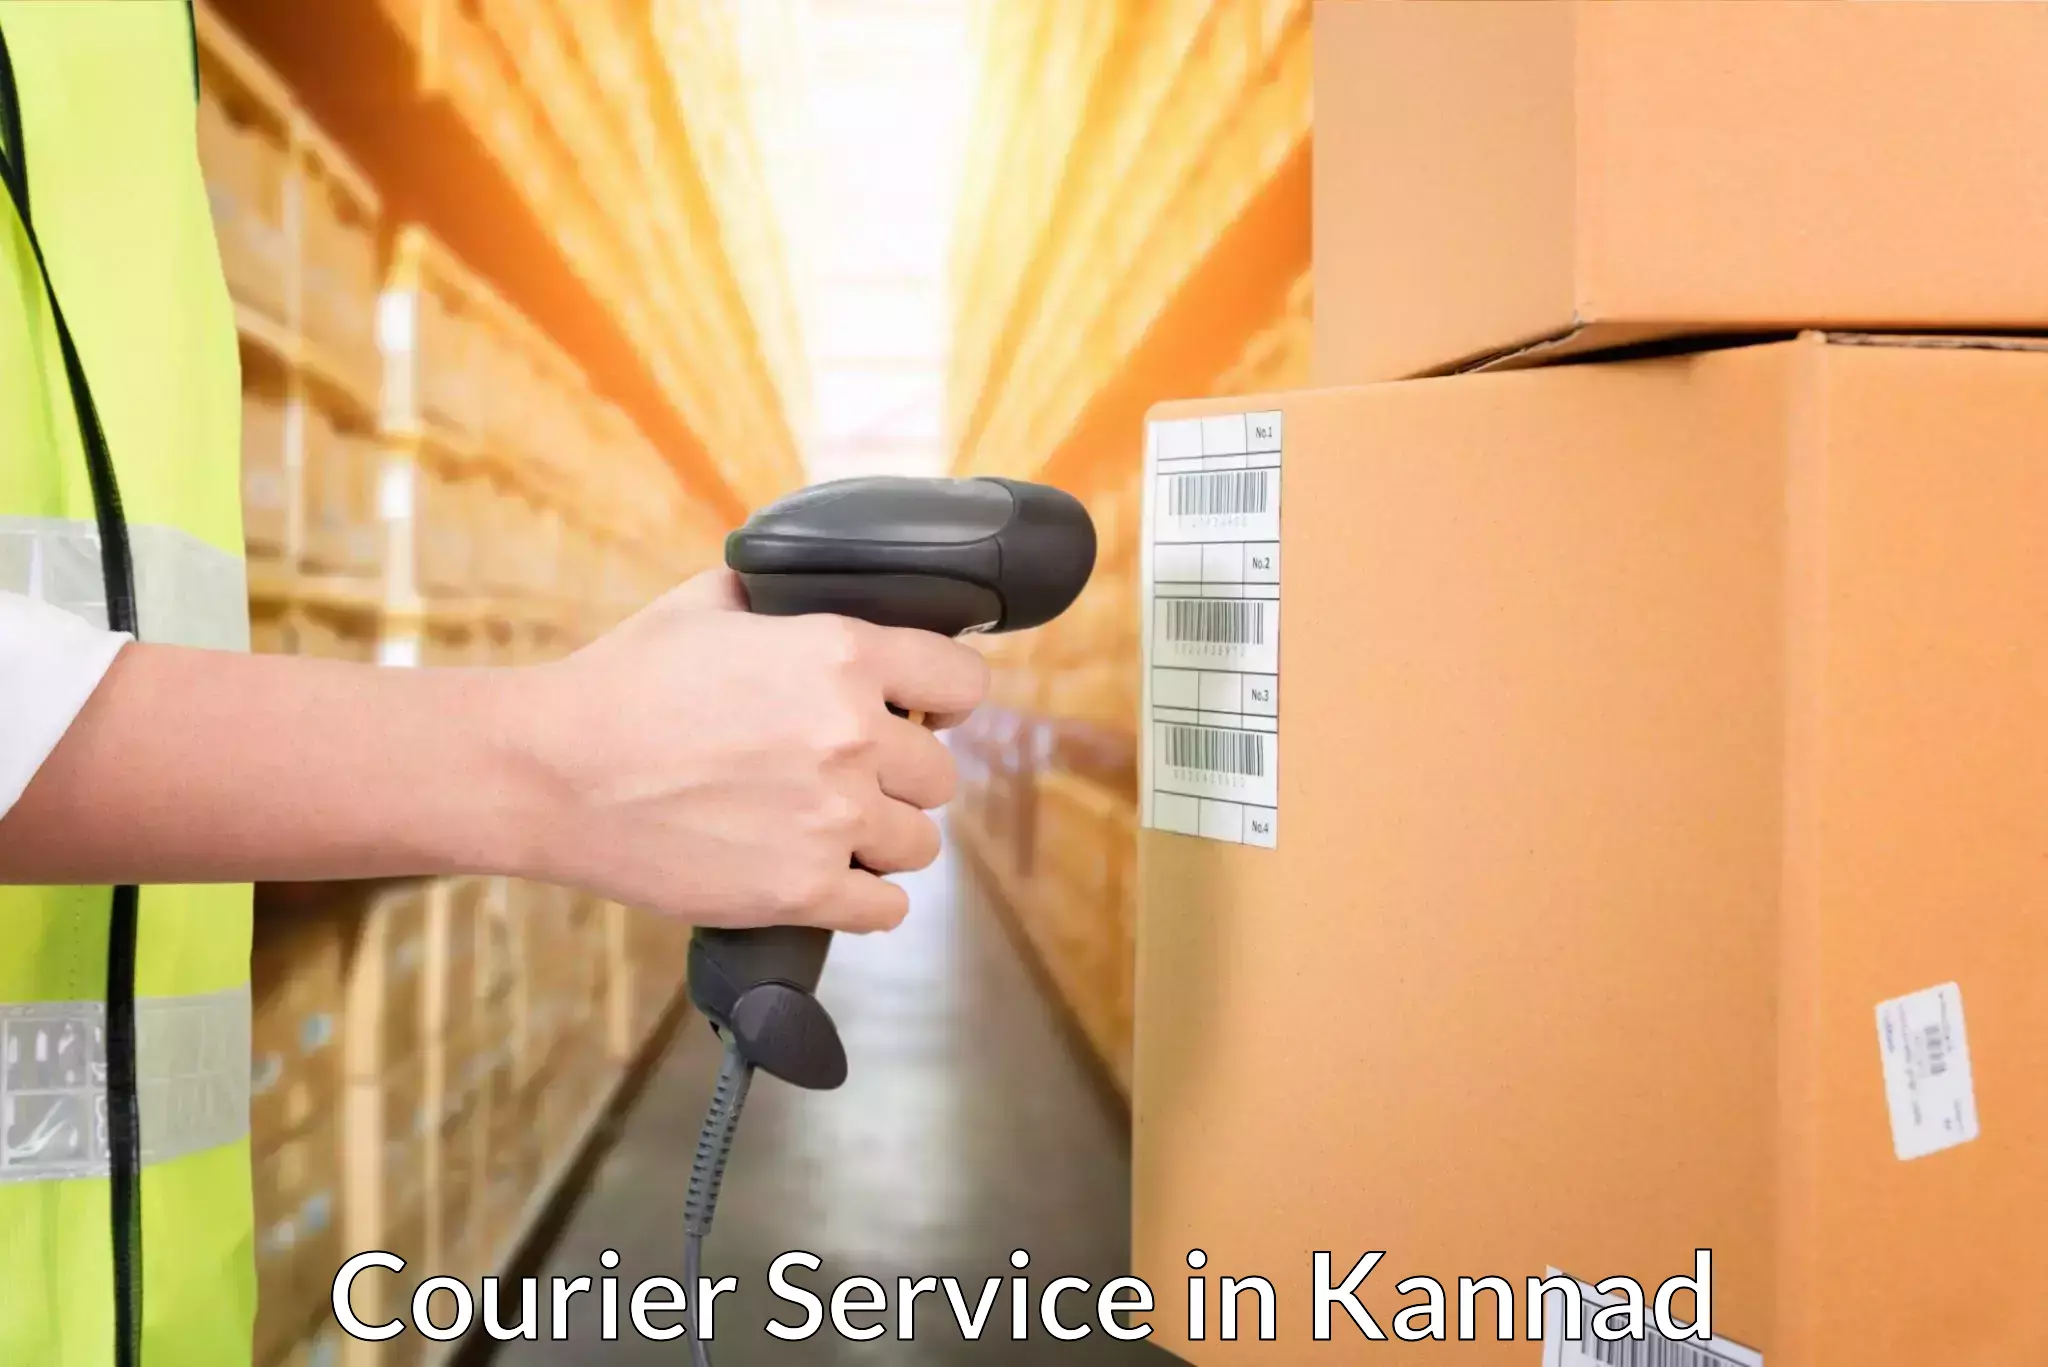 Express courier capabilities in Kannad